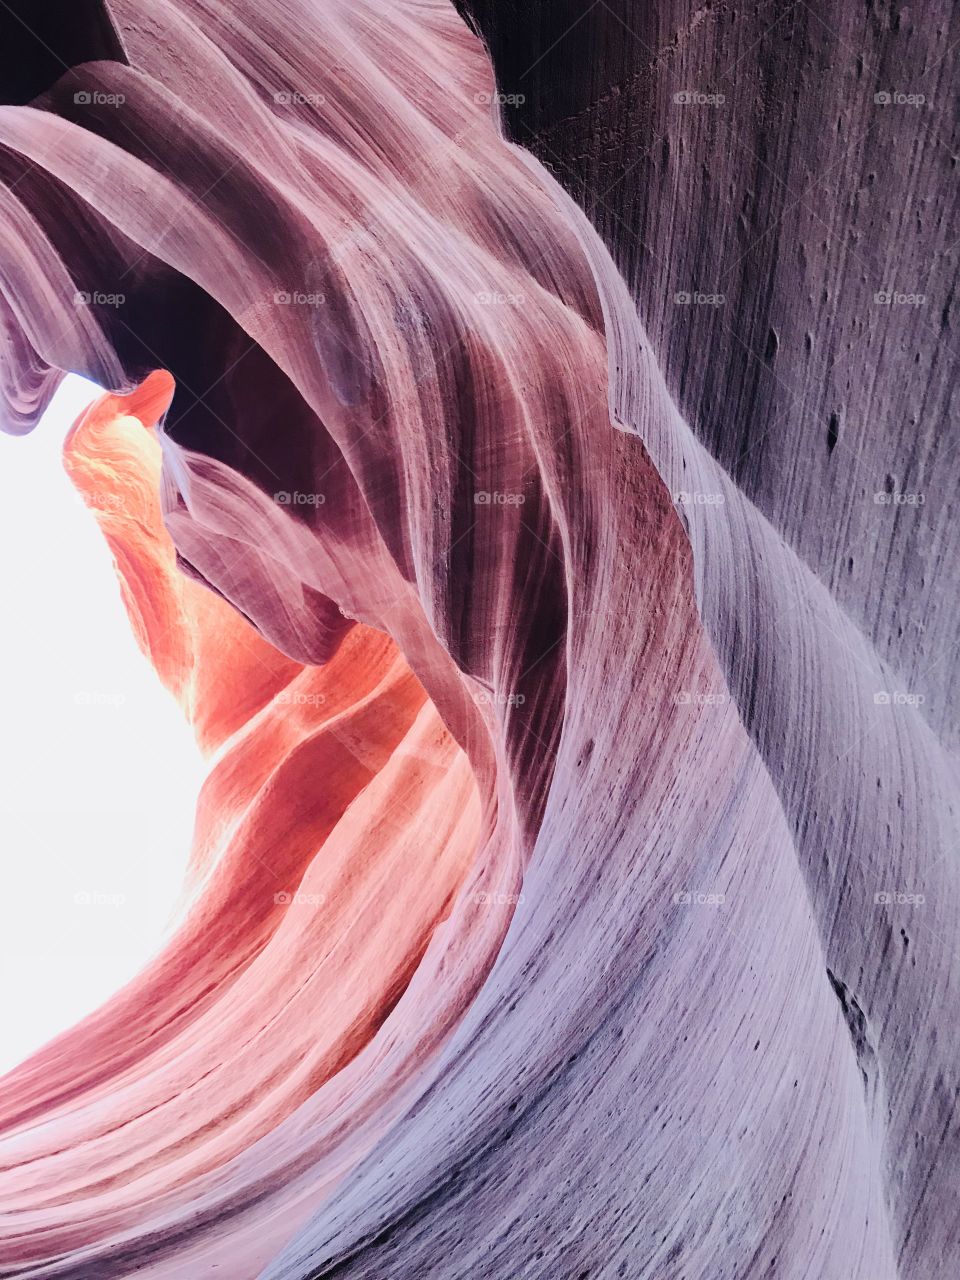 Antelope Canyon shapes and colors